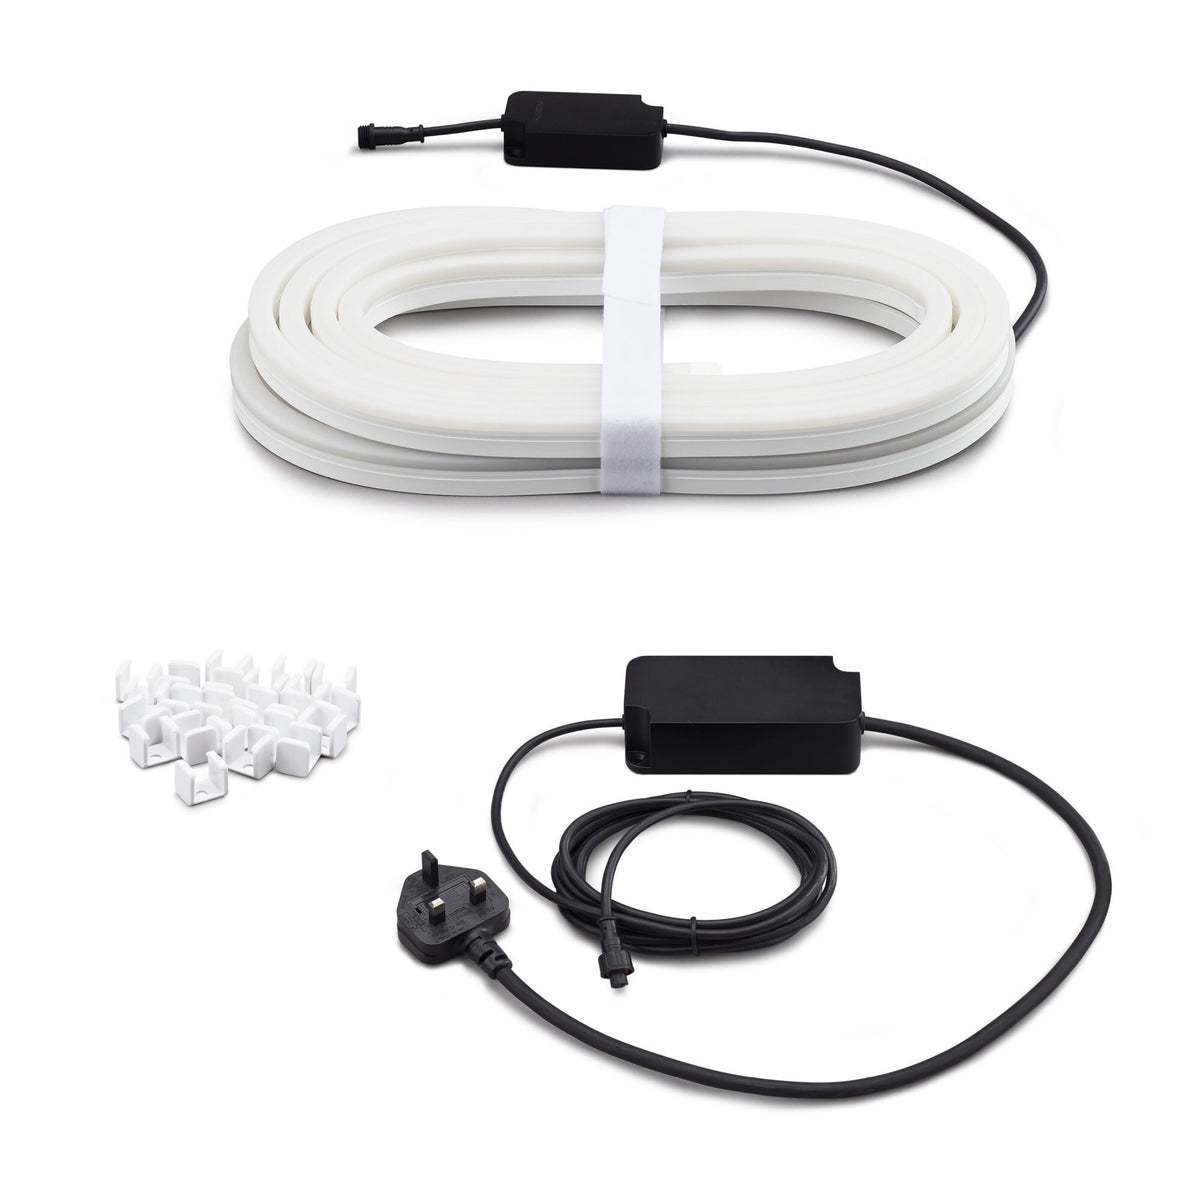 Philips Hue Outdoor Lighstrip (5 Metre) - White and colour ambience